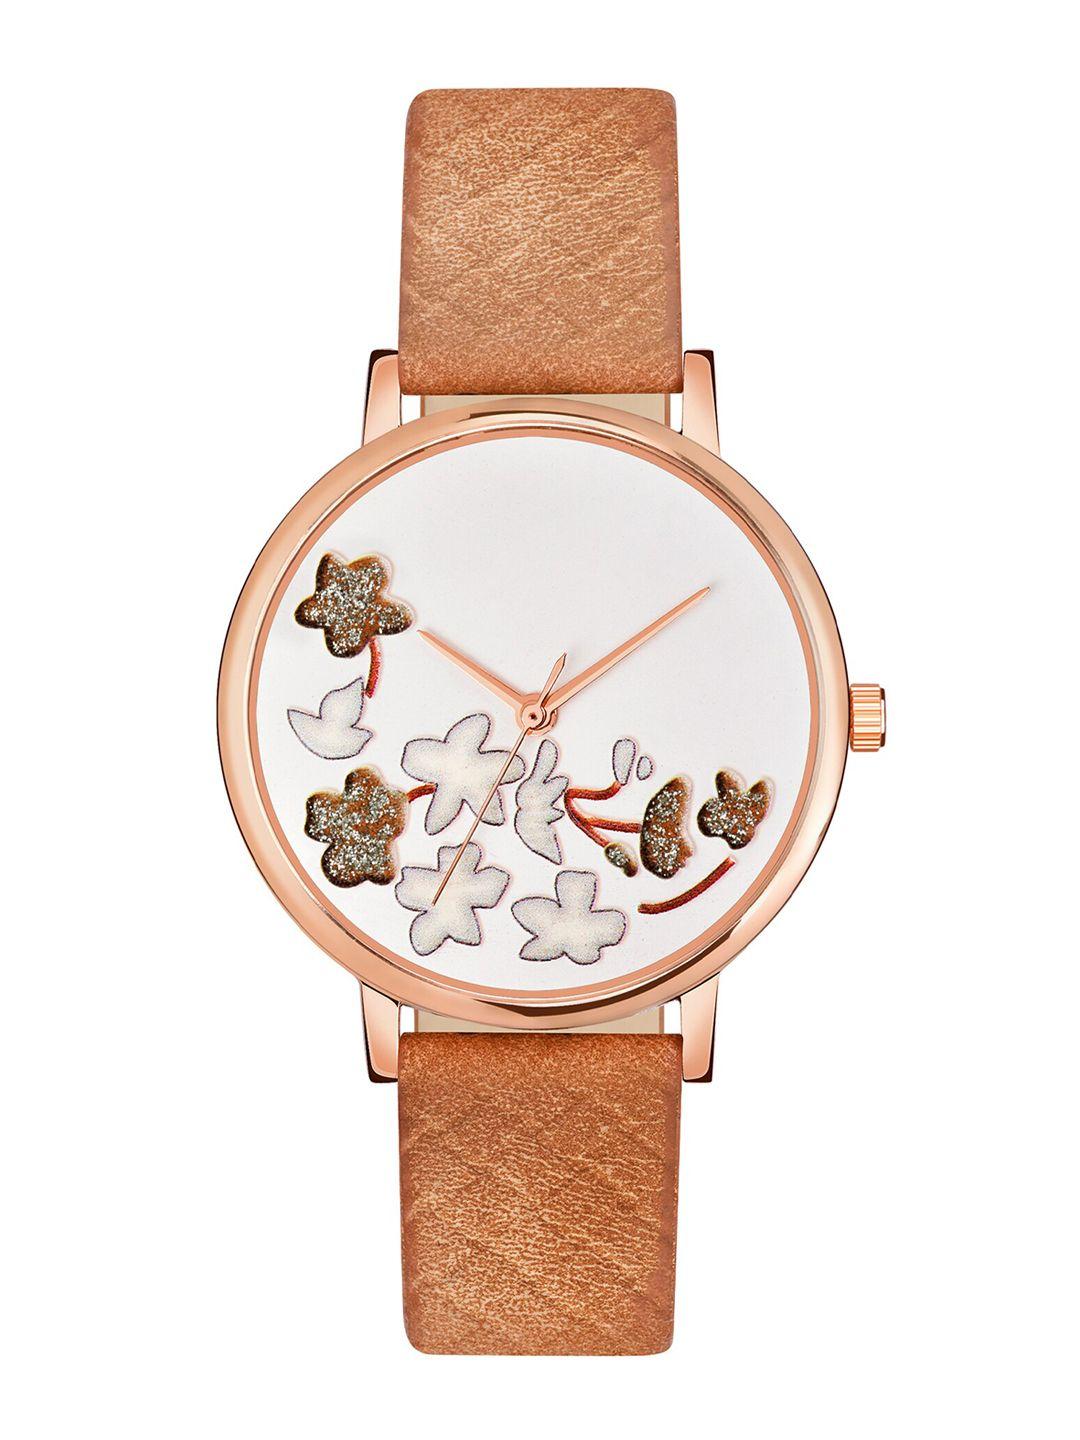 shocknshop-women-white-embellished-dial-&-brown-leather-straps-analogue-watch-mt503